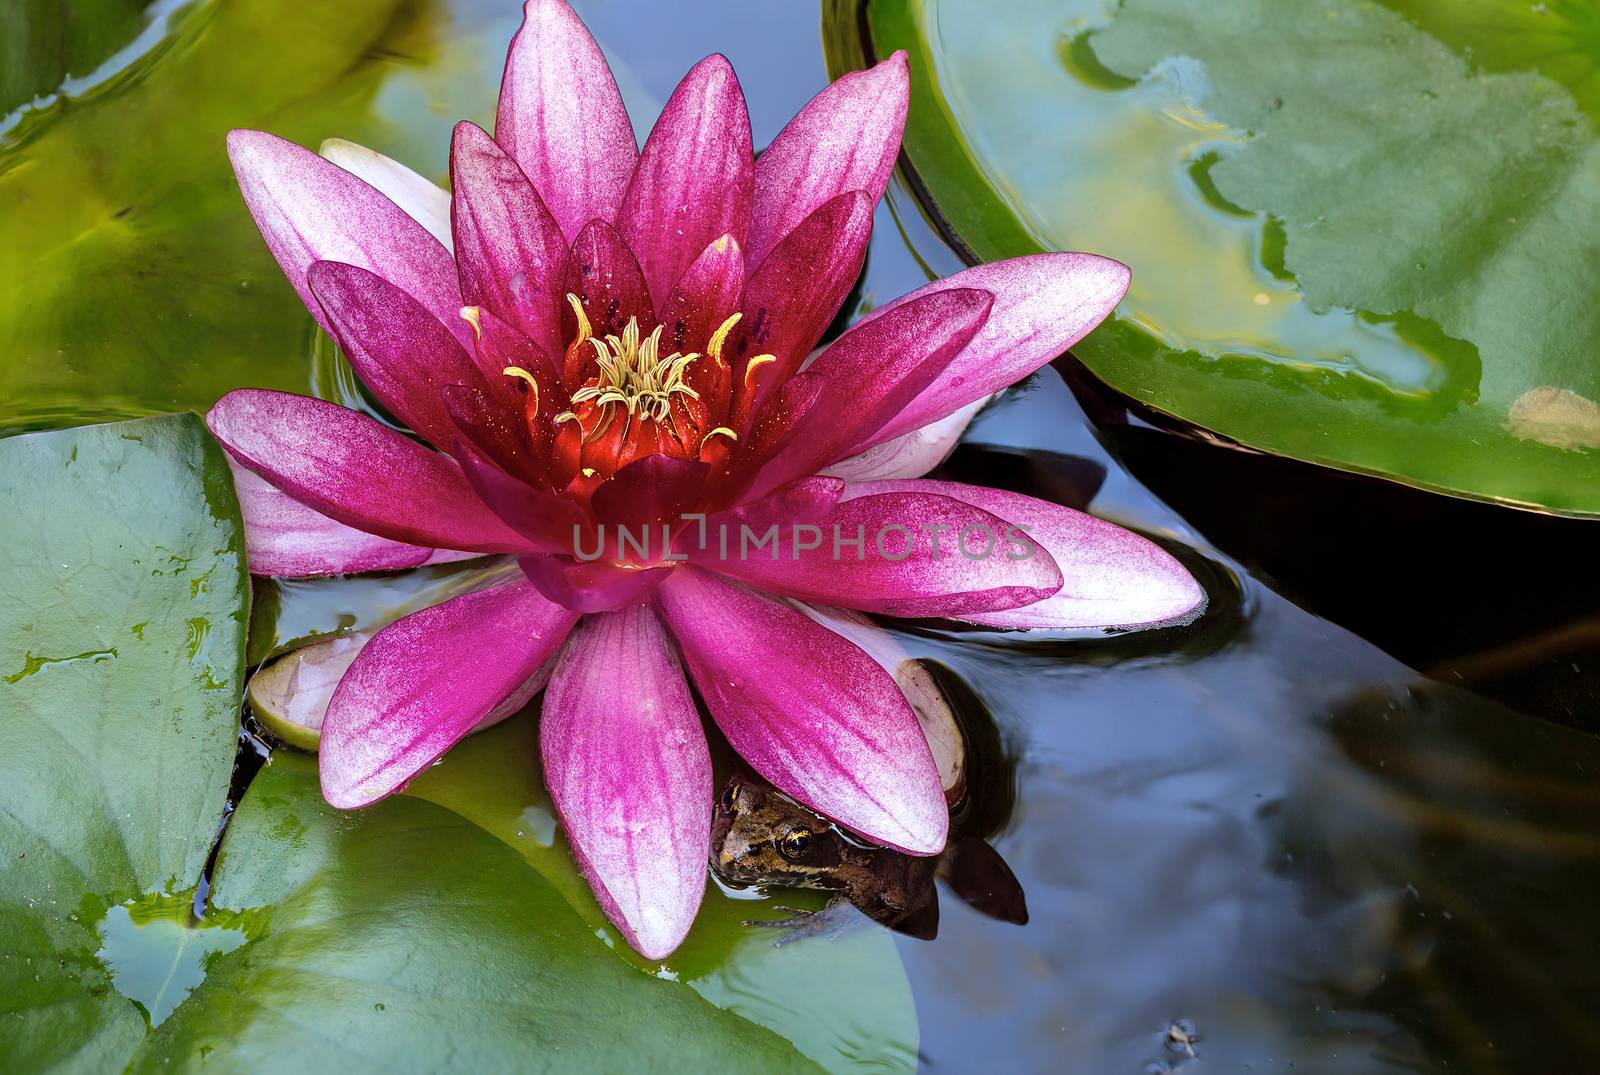 Frog Hiding Under Pink Water Lily Flower by Davidgn